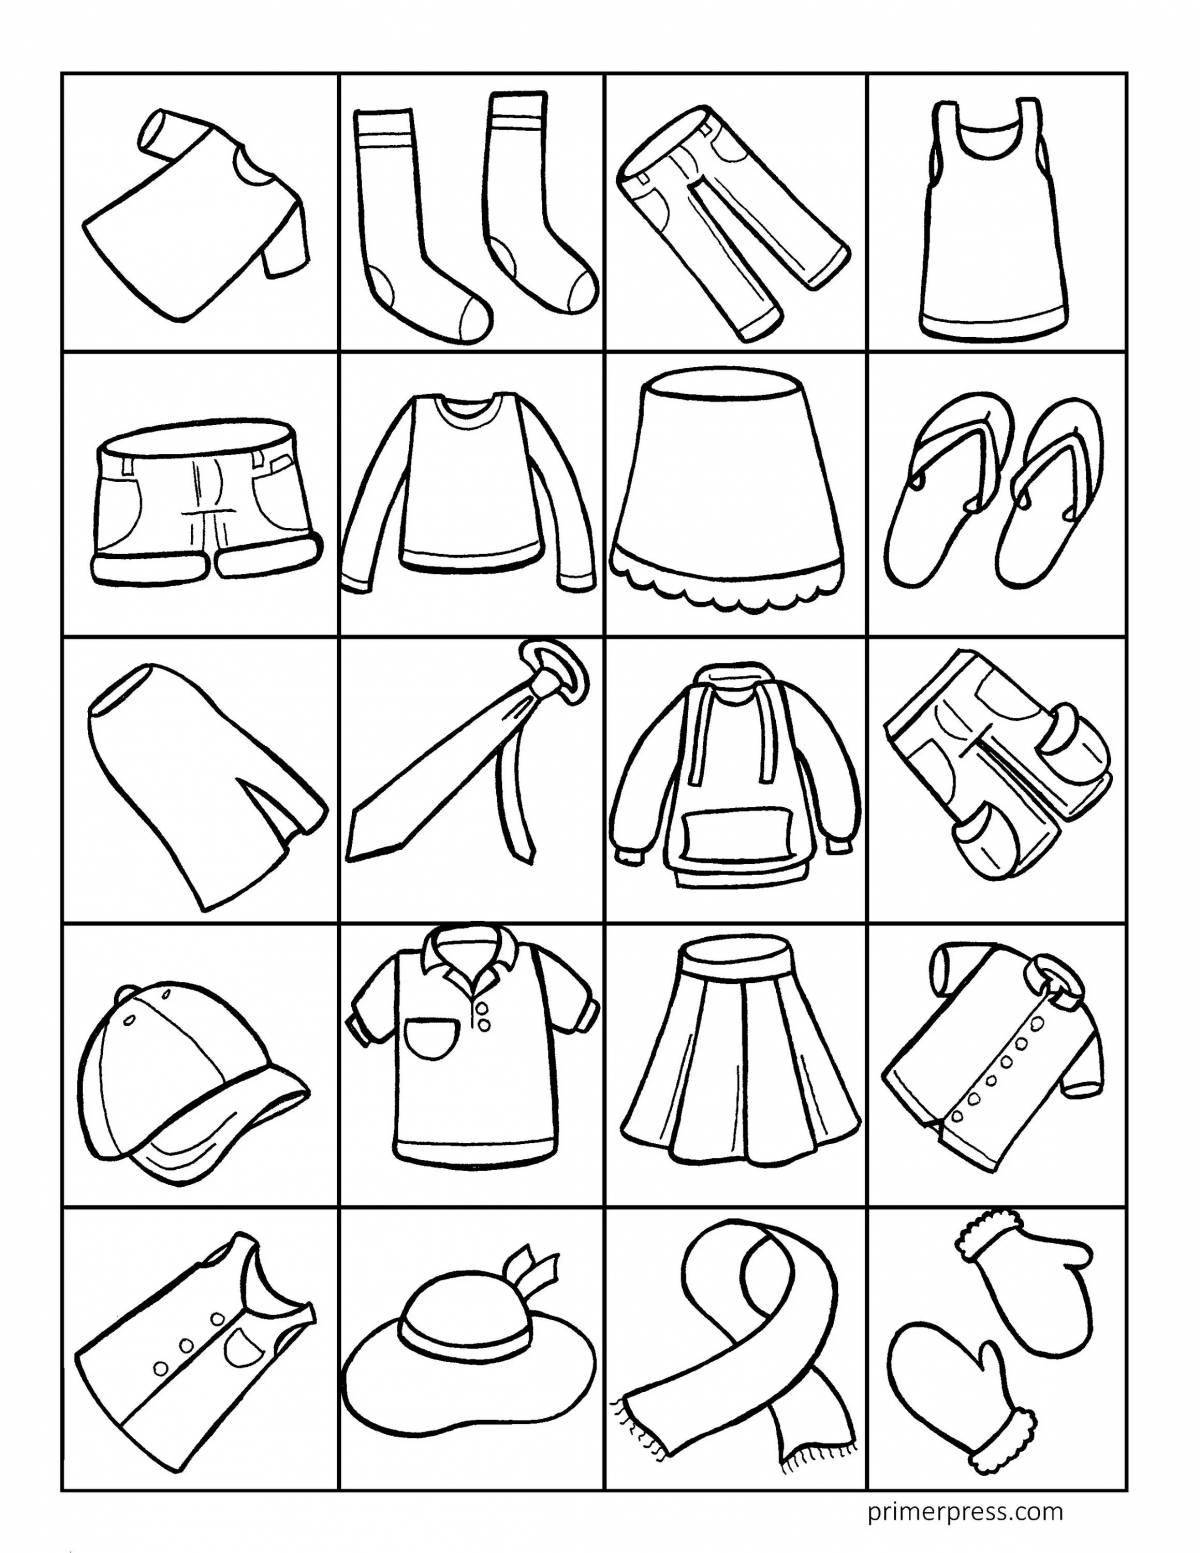 Coloring book innovative clothes for children 4-5 years old